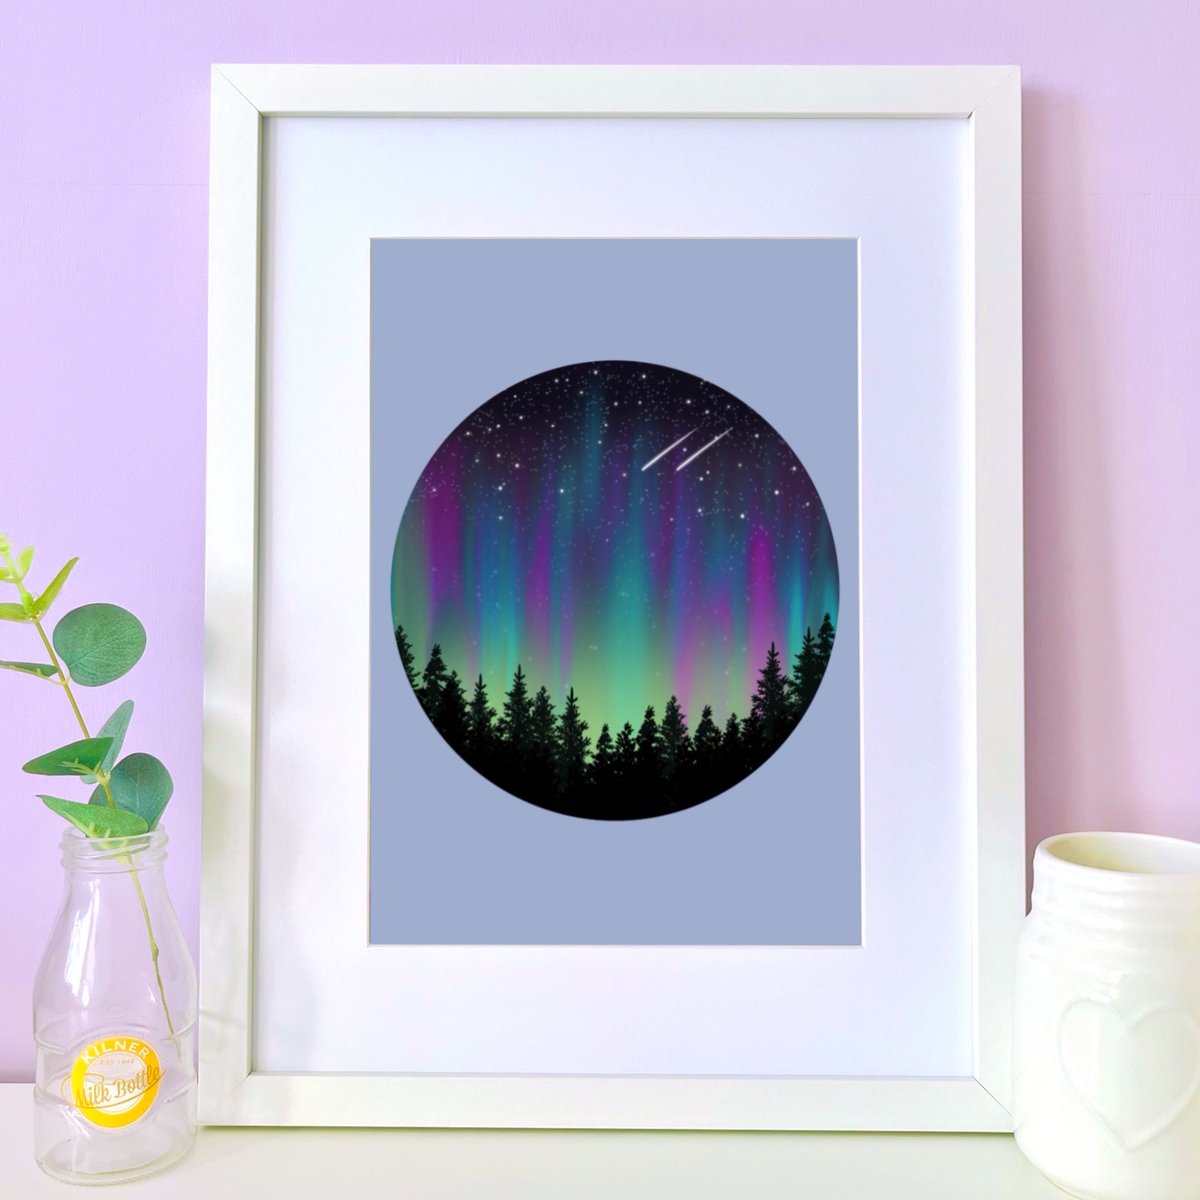 Magical Northern Lights A4 Print 💙💜💚 There is currently 50% off all prints until the 3rd July 💚💙💜 #womaninbizhour #handmadehour #northernlights #nature #handmade #etsyuk #etsysale #giftideas #shopsmalluk #shopindie etsy.com/listing/964858…